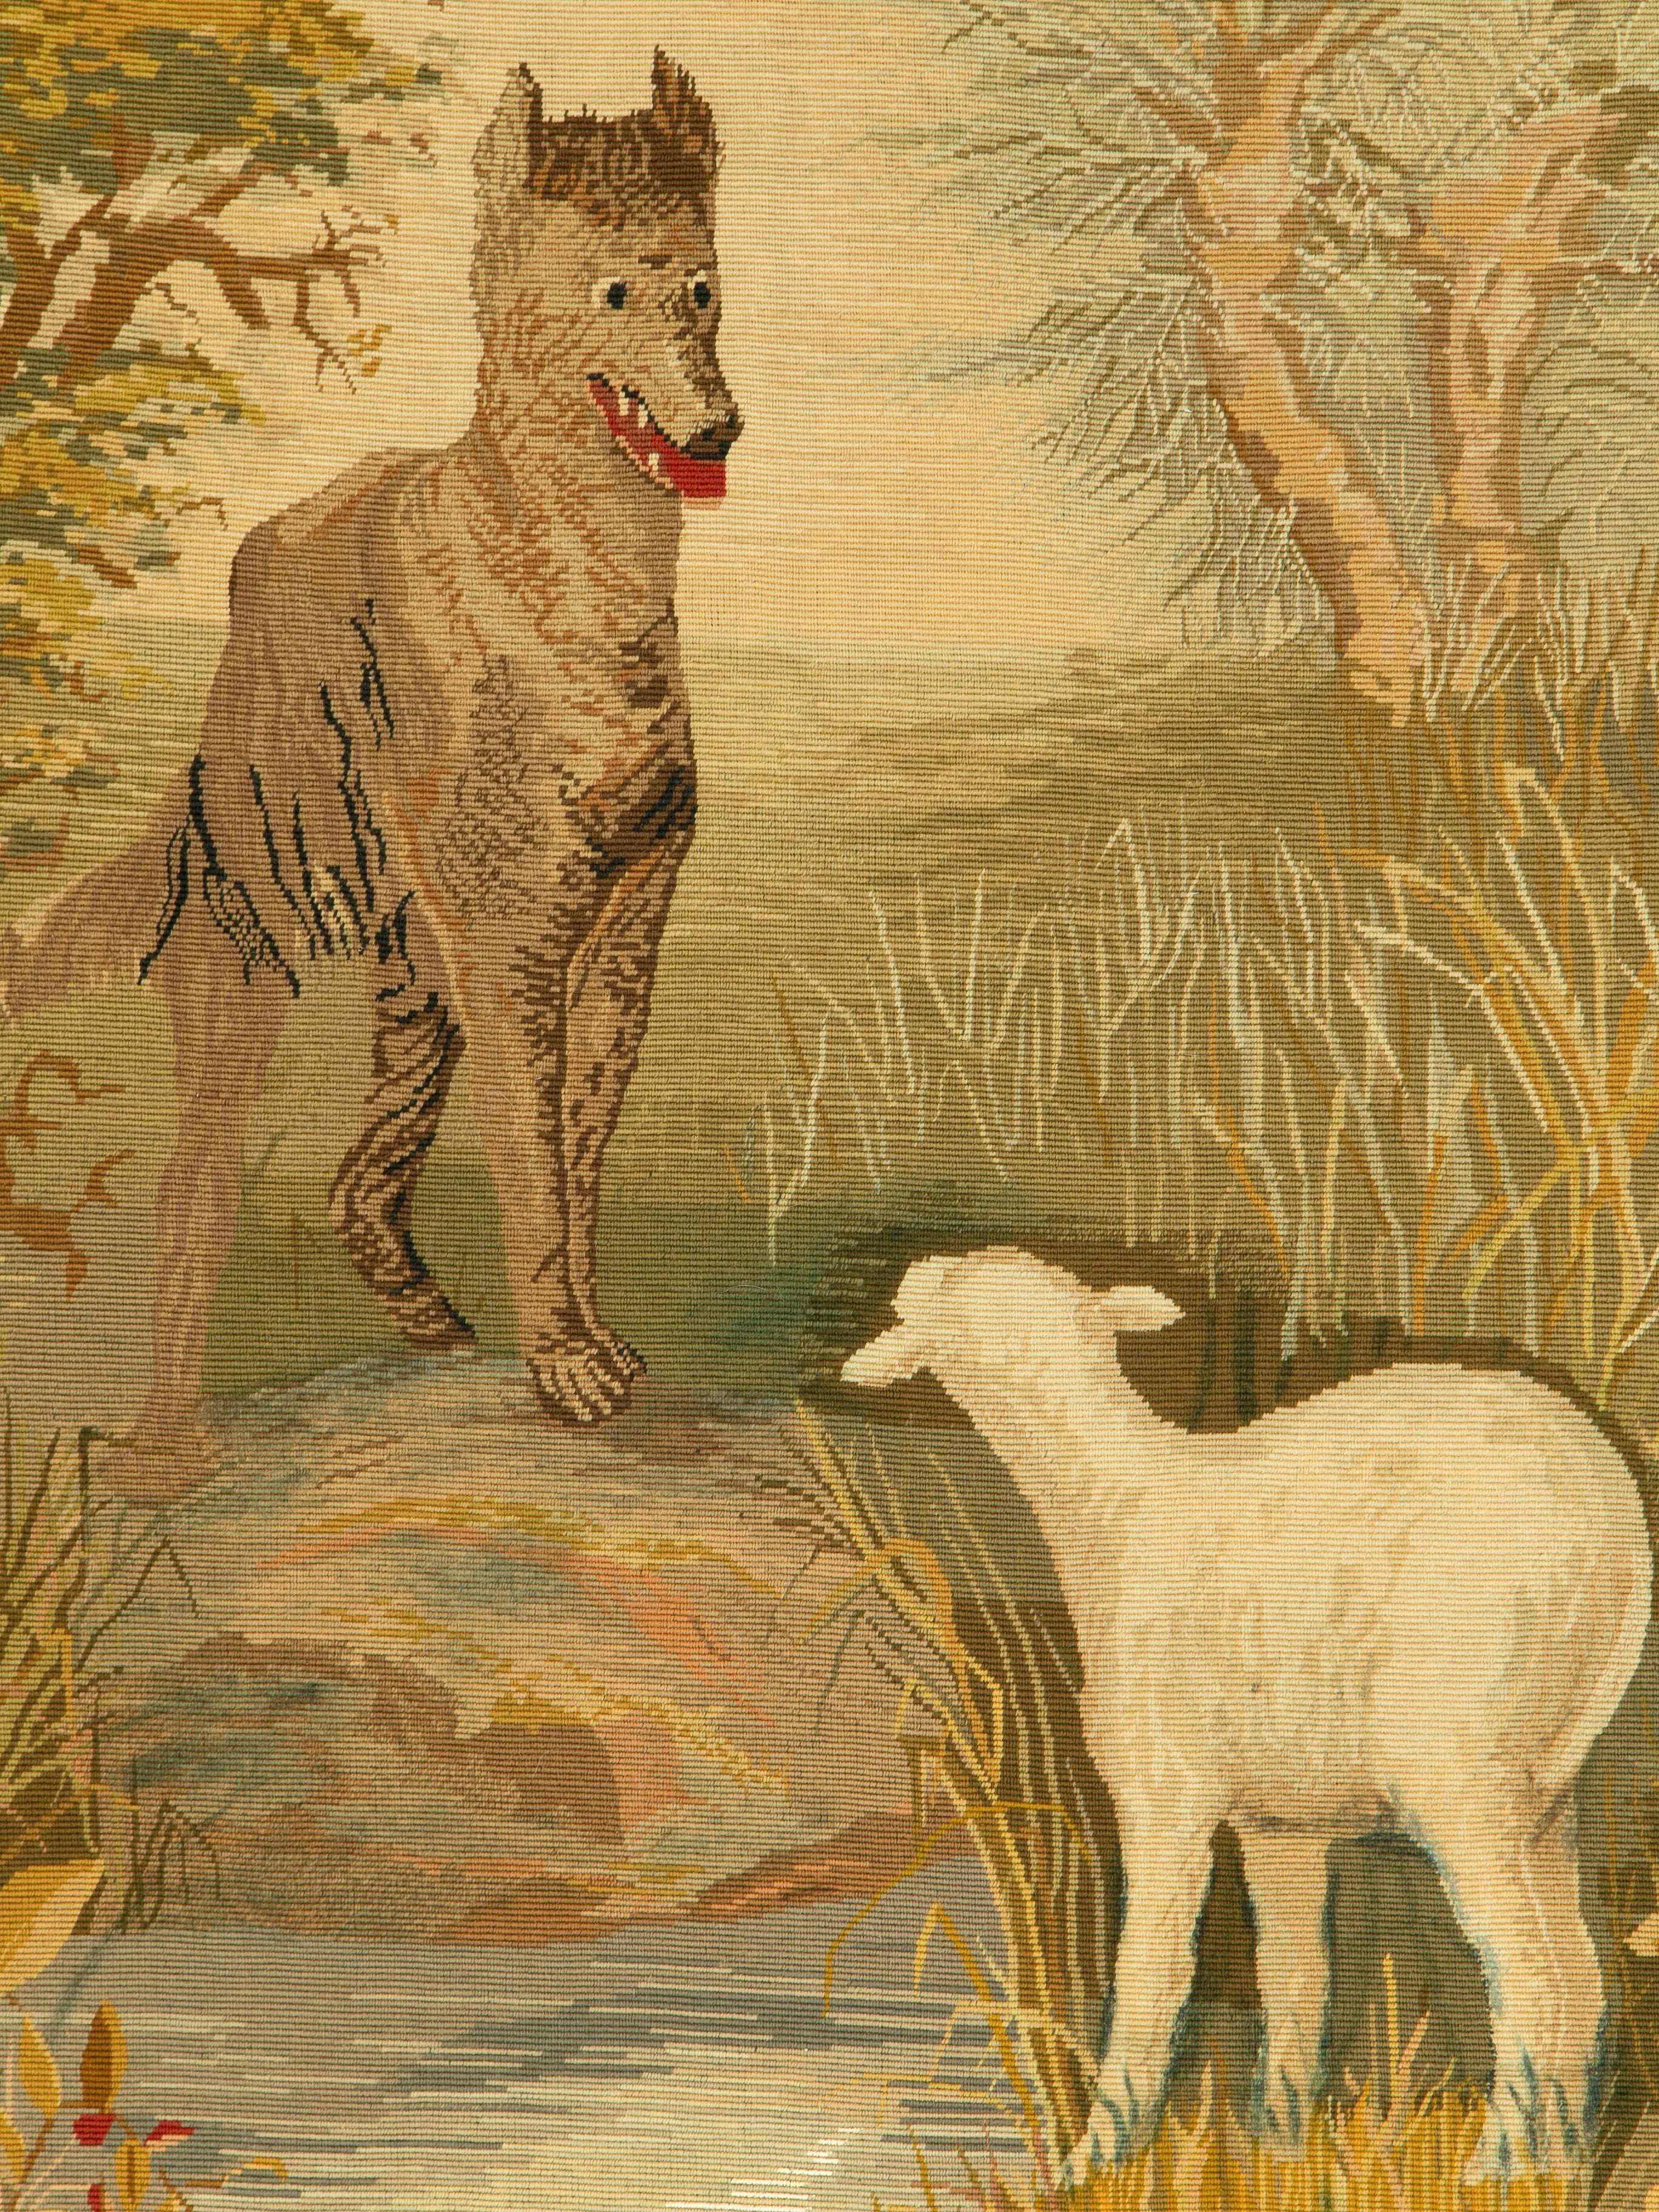 A vintage Fresh tapestry from the mid-20th century. A lamb is greedily eyed by a hungry wolf and we know what will happen next. This panel depicts an Aesopian fable, “The Wolf and the Lamb.” The animals and setting are realistically depicted in